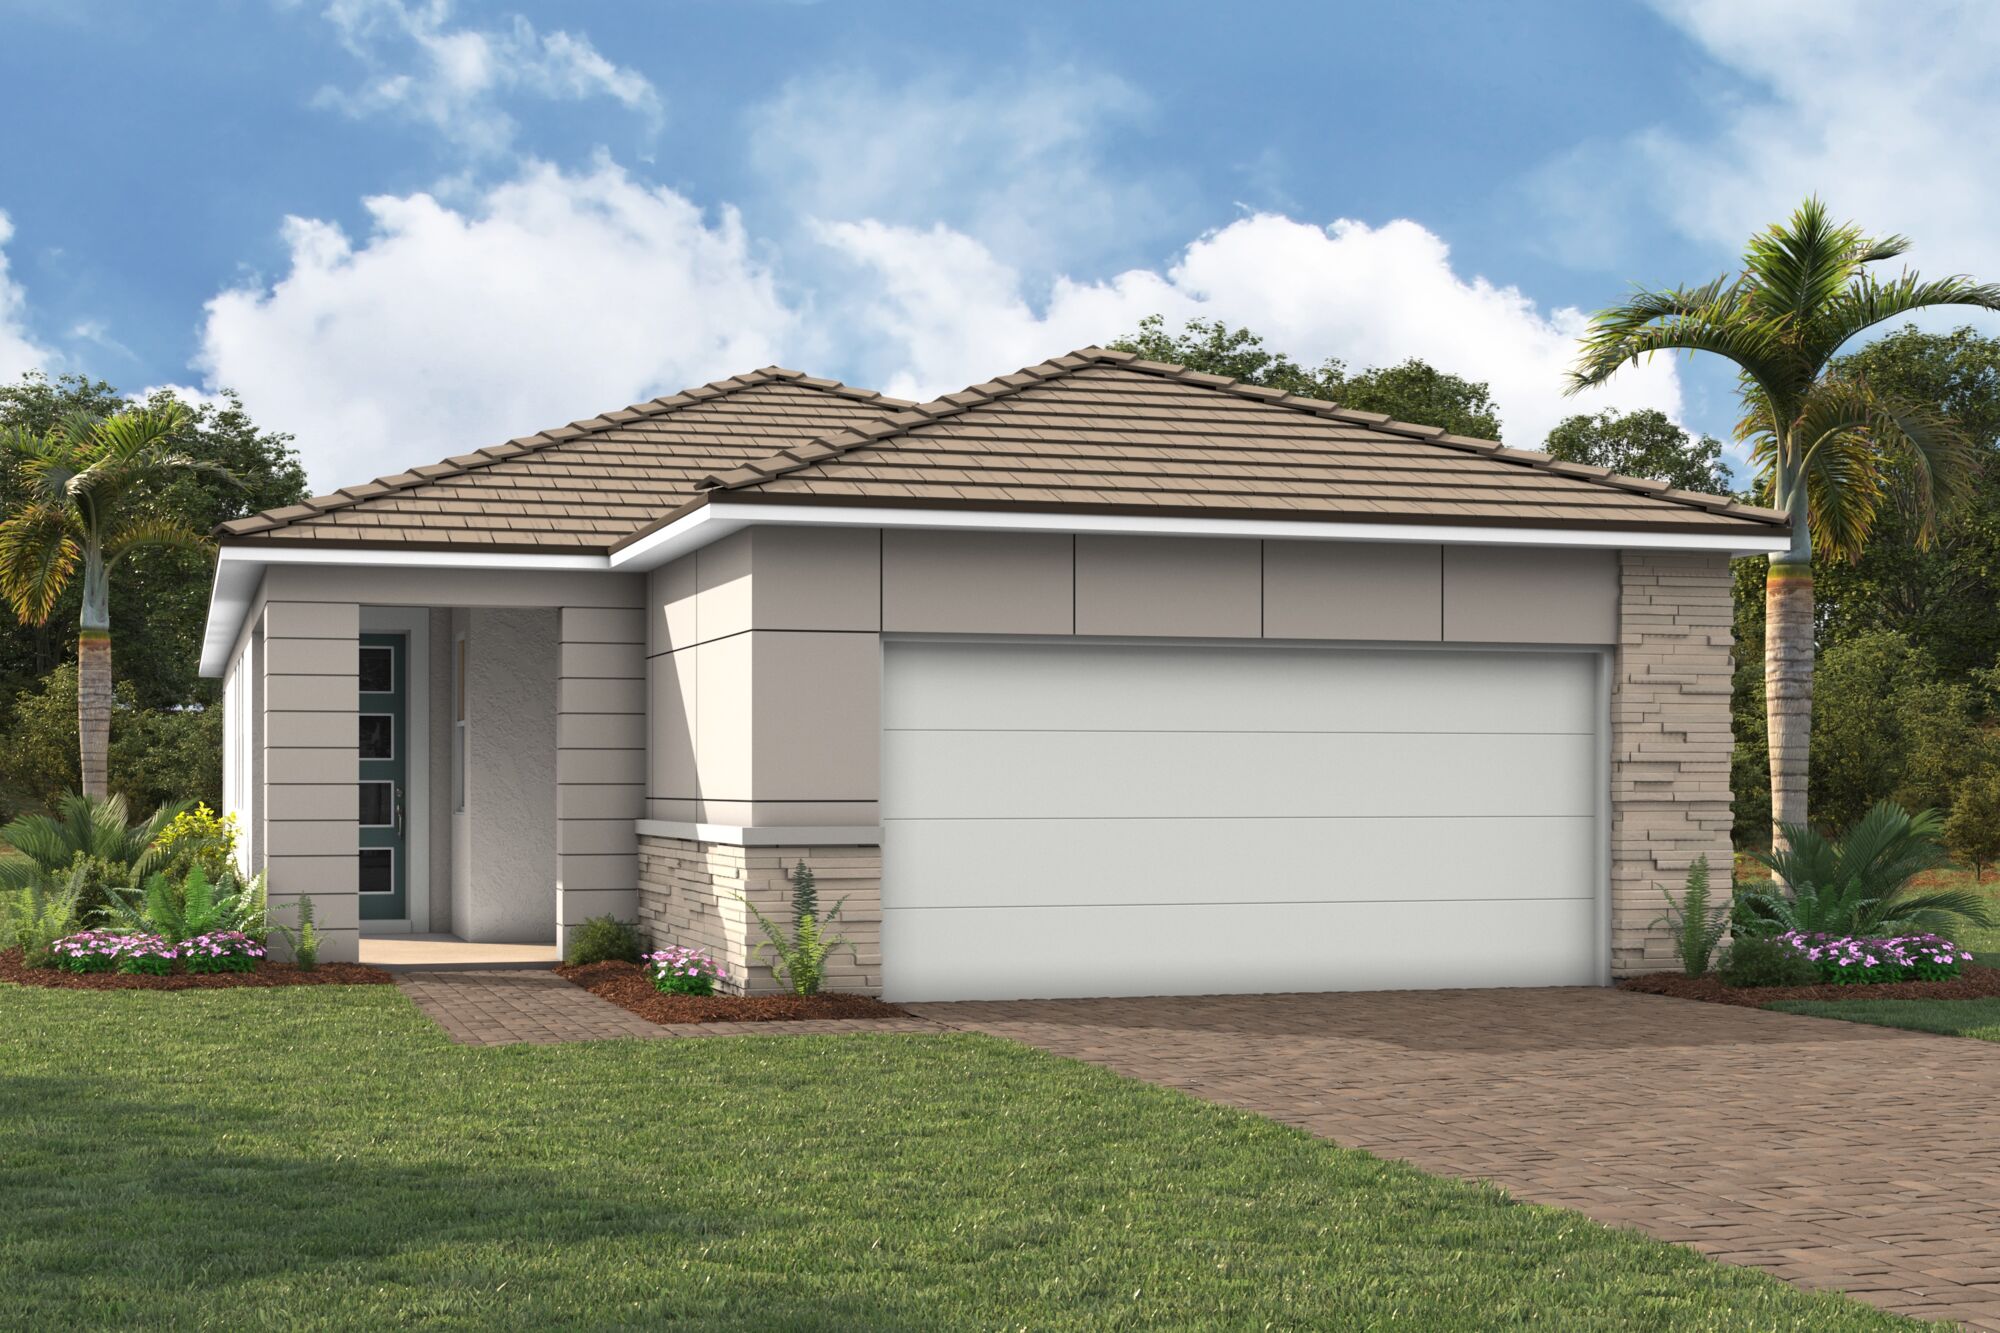  Elevation Front with garage